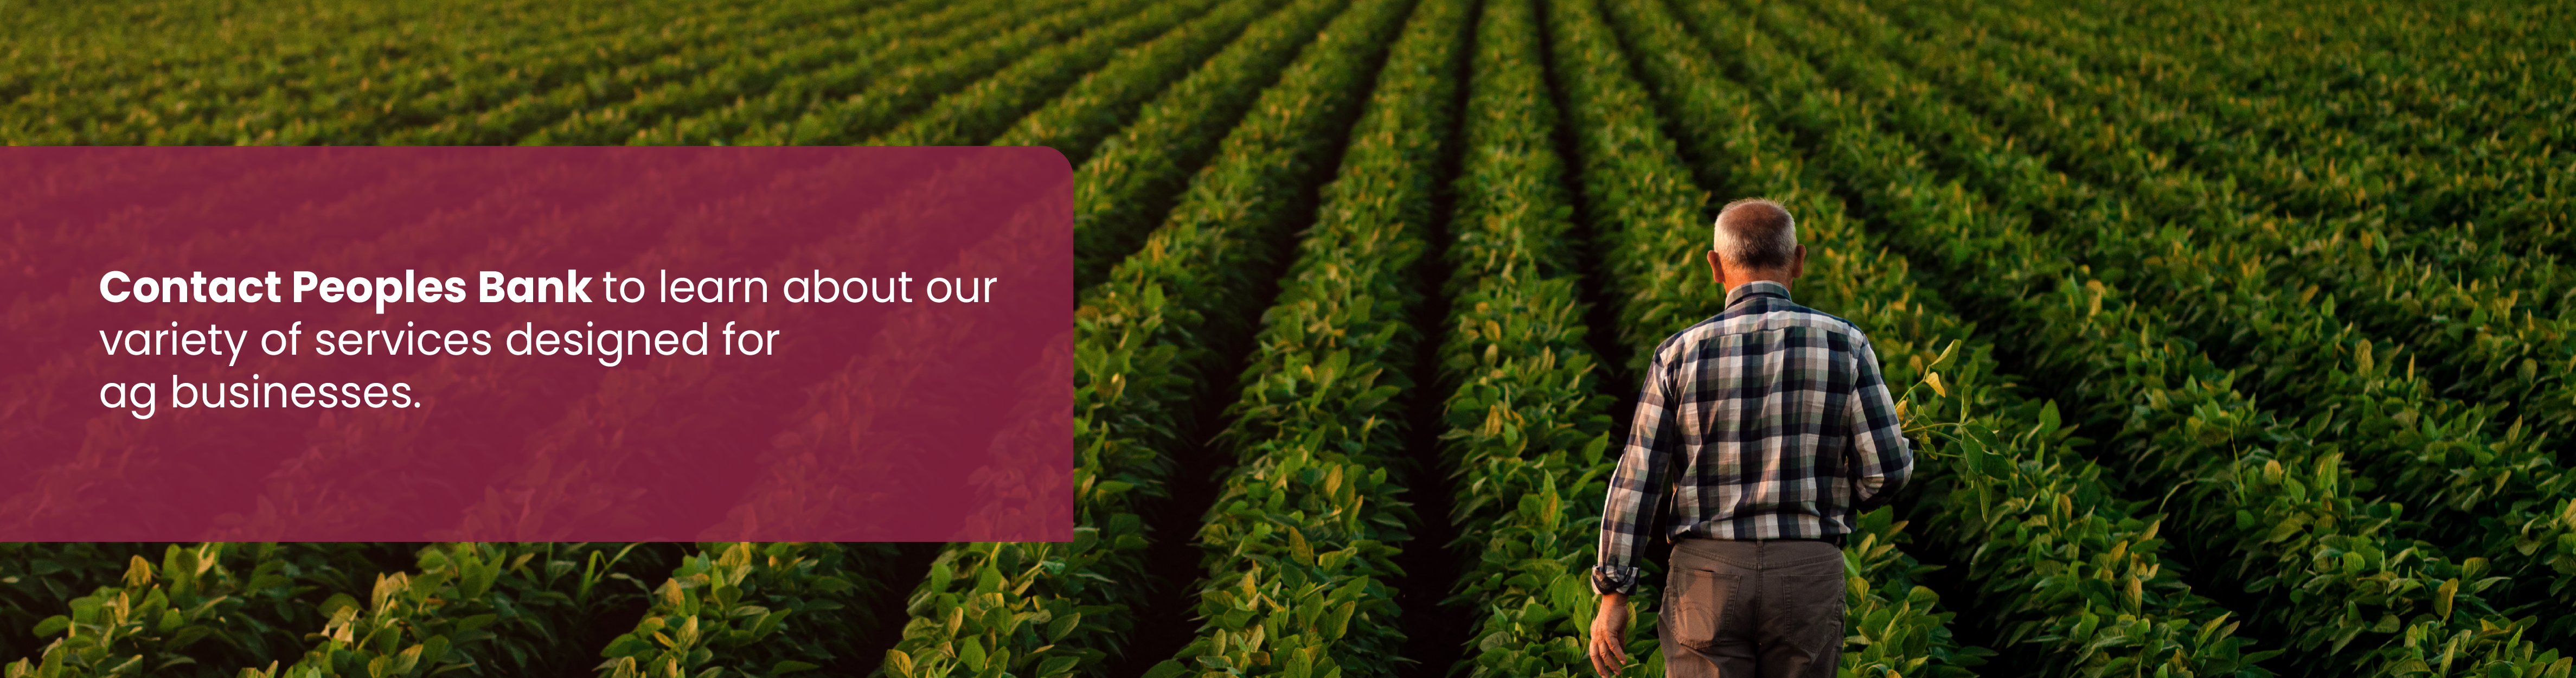 Man in soybean field. Text: Contact Peoples Bank to learn about our variety of services designed for ag businesses.